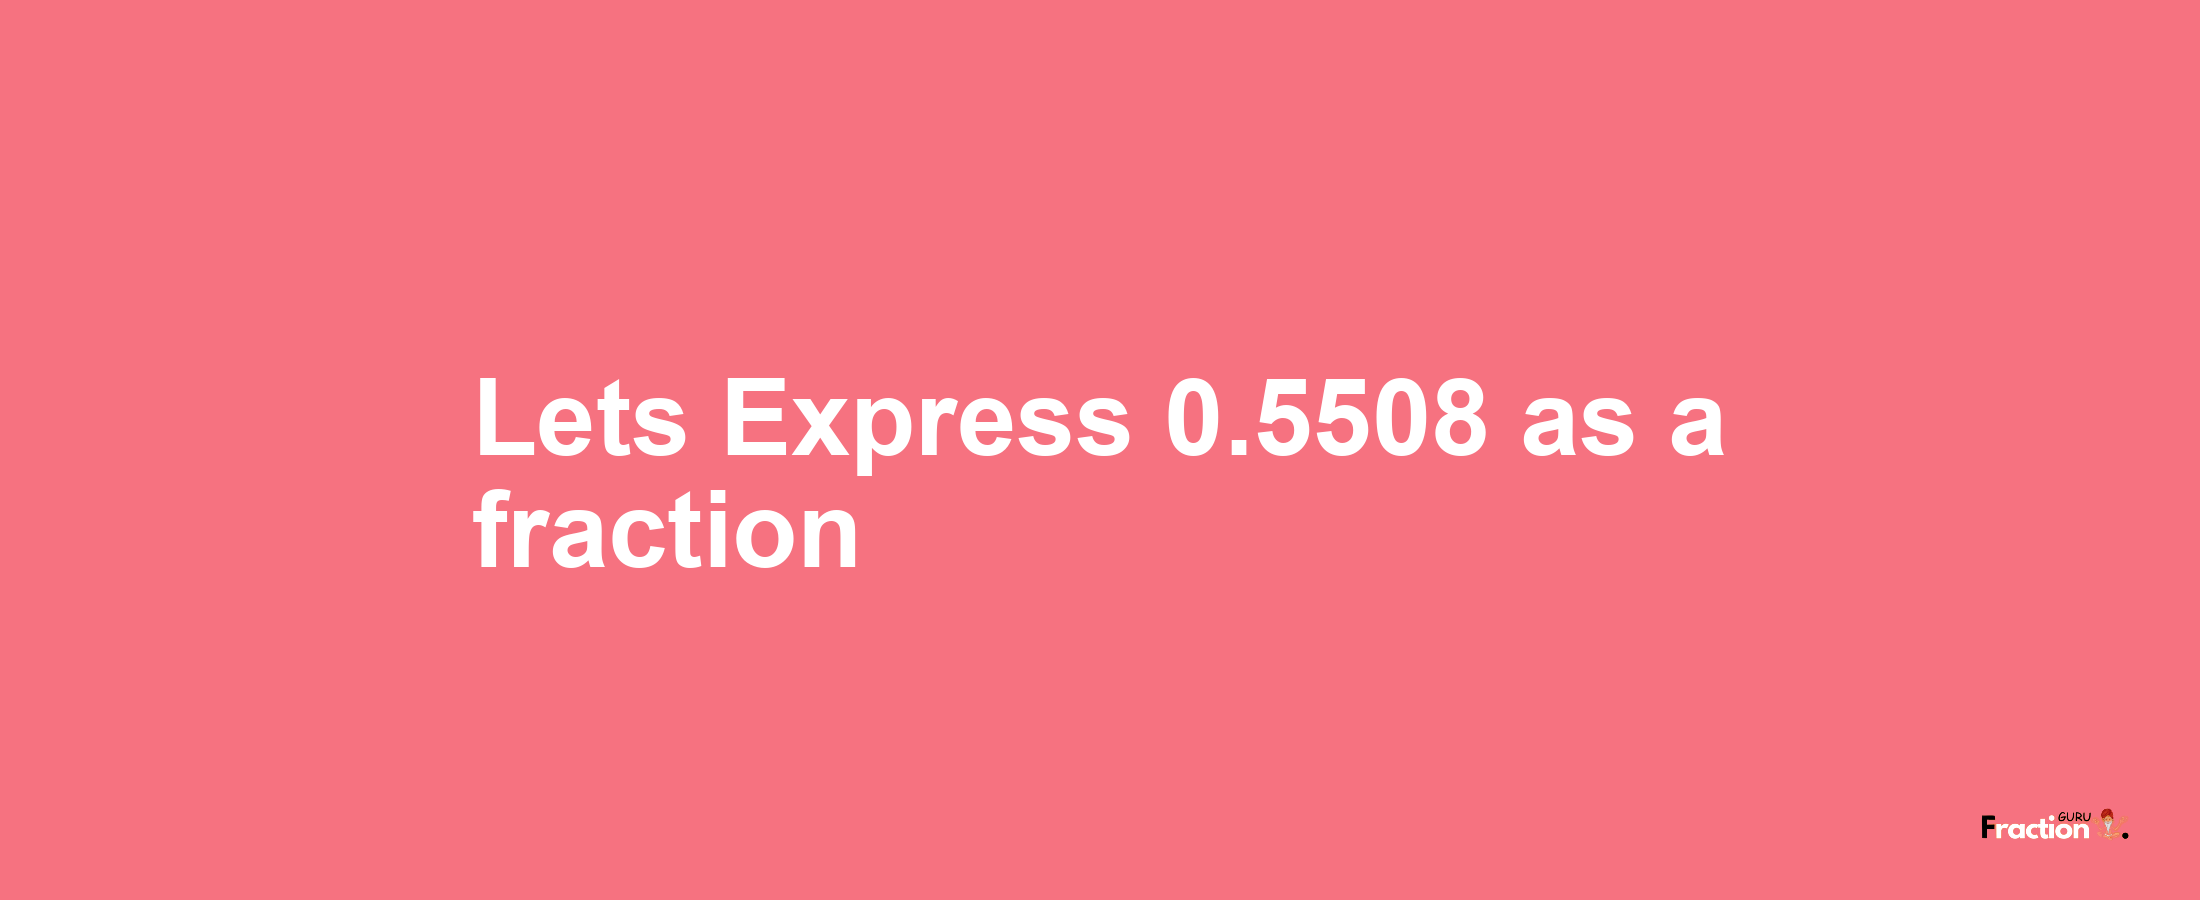 Lets Express 0.5508 as afraction